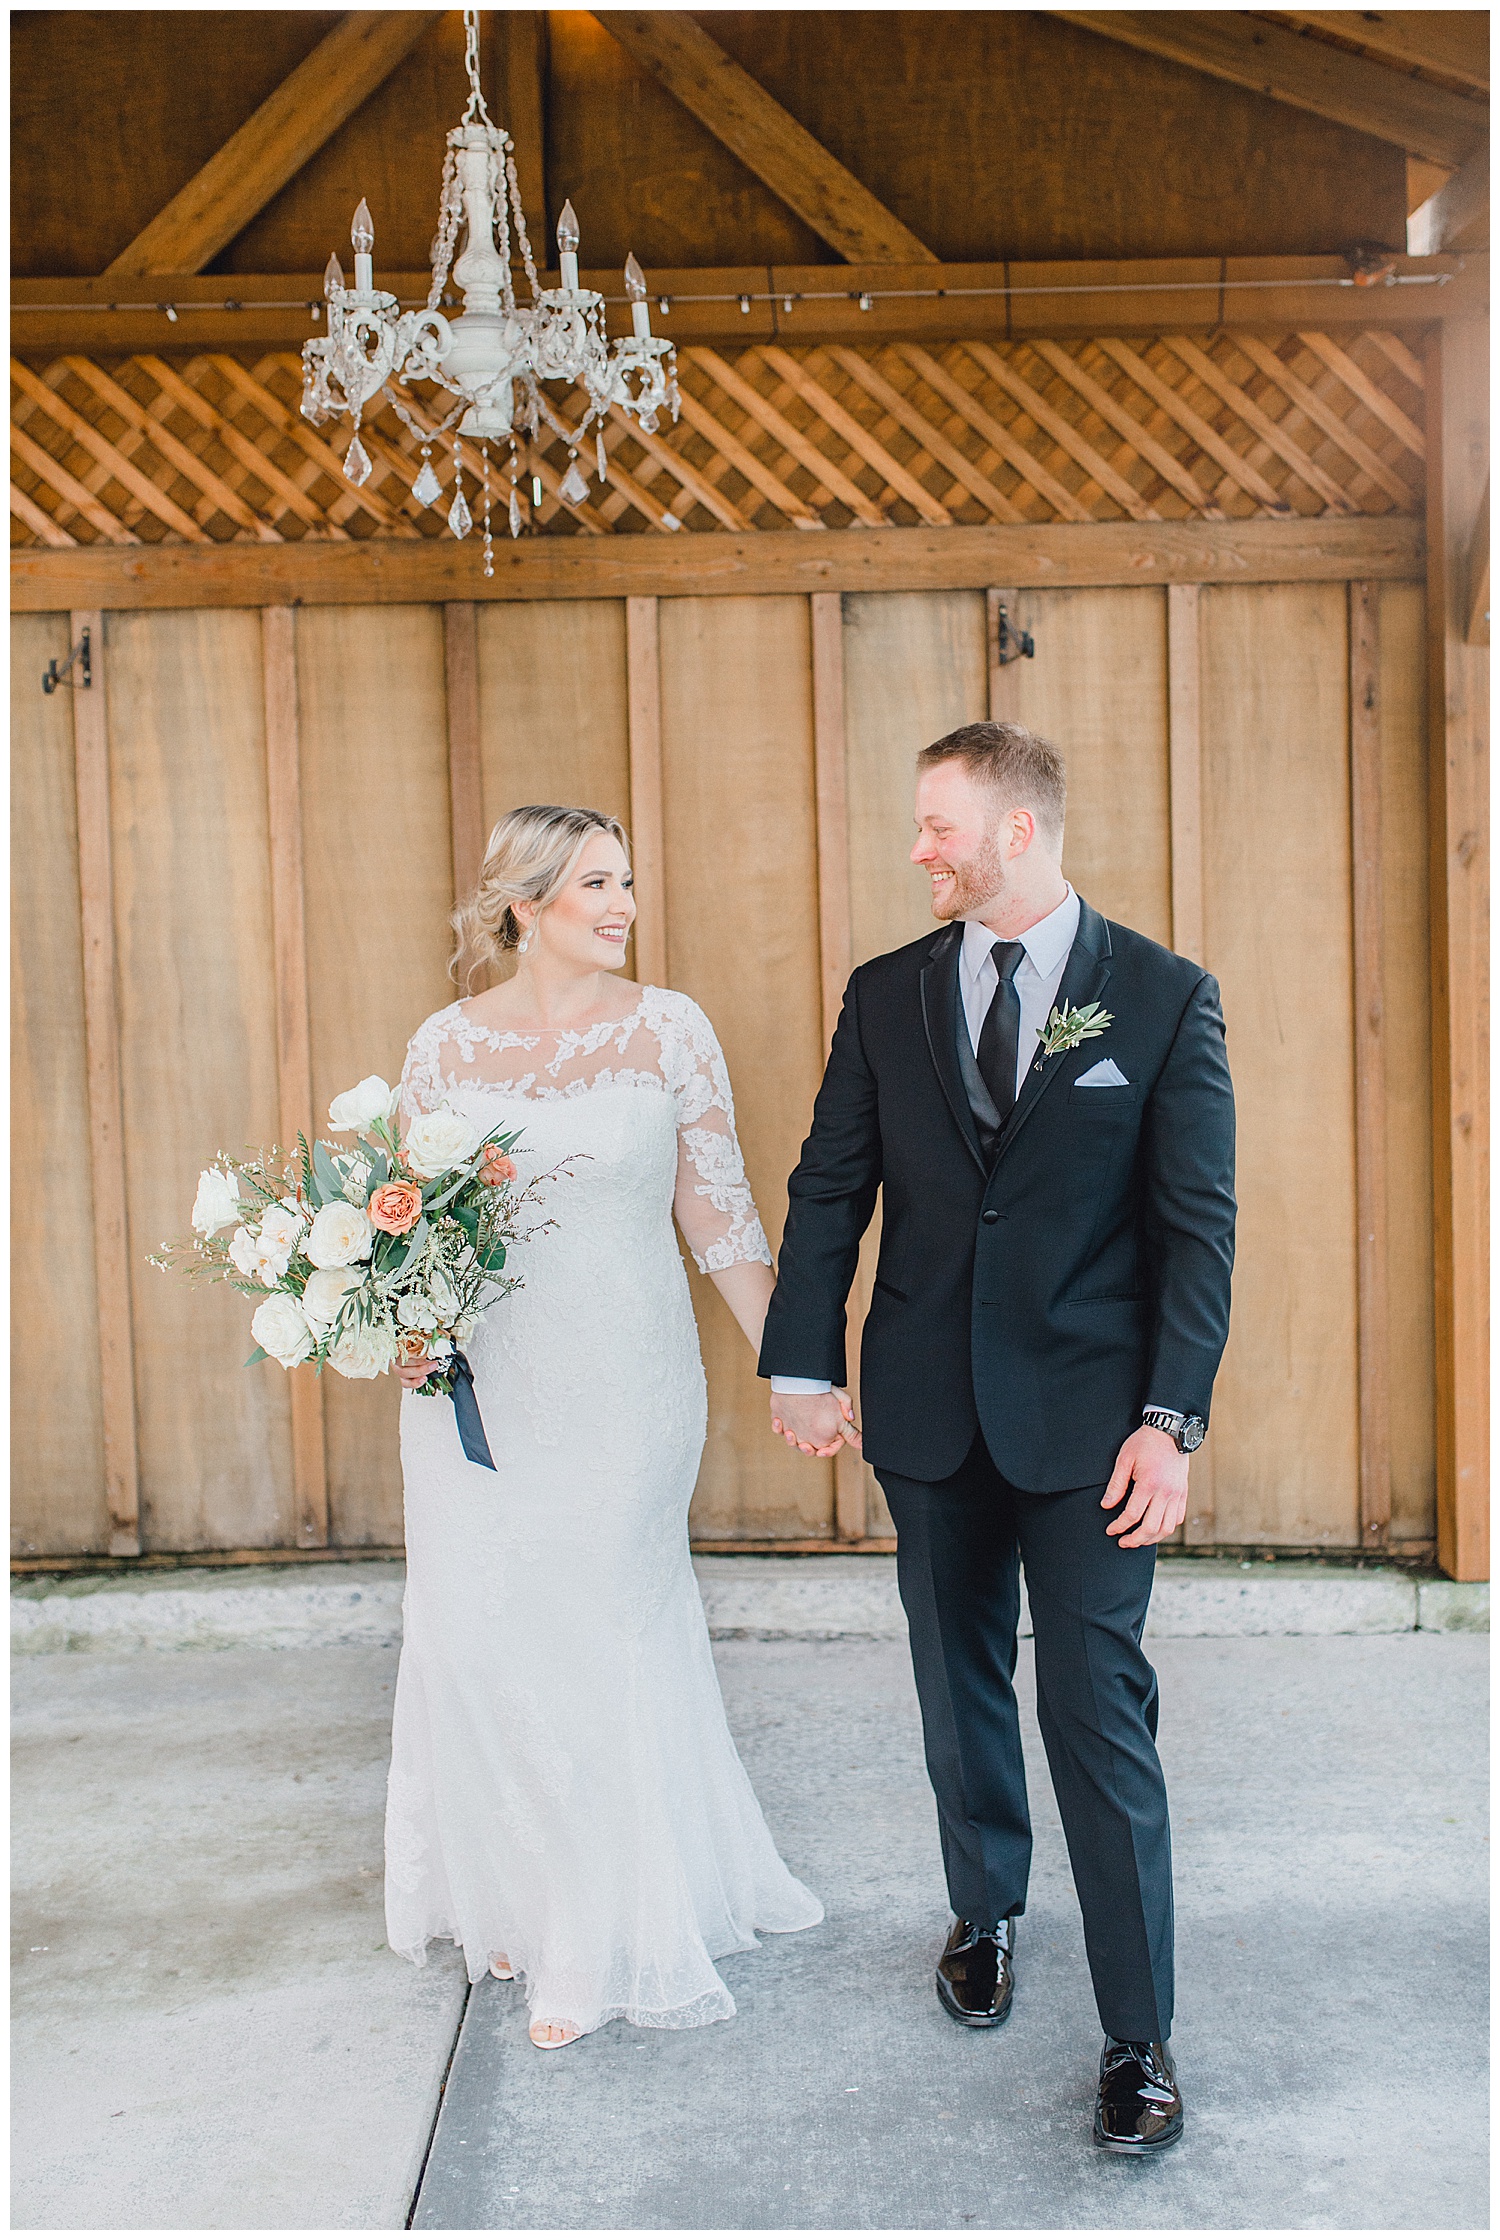 ERC-7132_A beautiful winter wedding in Snohomish, Washington at Thomas Family Farm was simply perfect.  This rustic and modern styled wedding was dripping with romance and photographed by Emma Rose Company, a pacific northwest wedding photographer..jpg